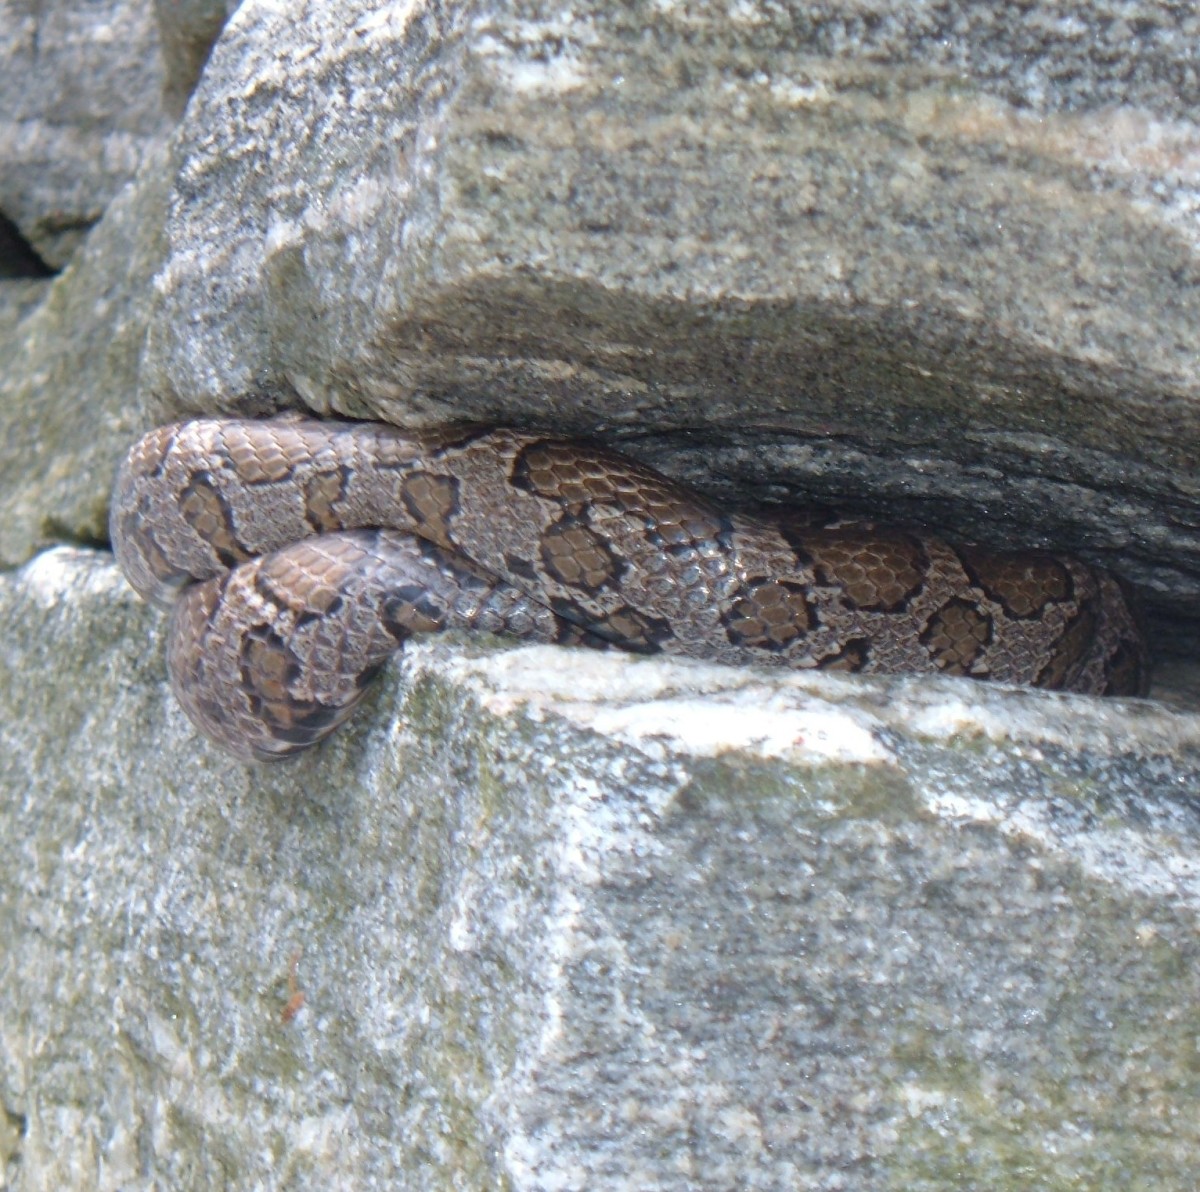 A Milk Snake hides in our stone wall